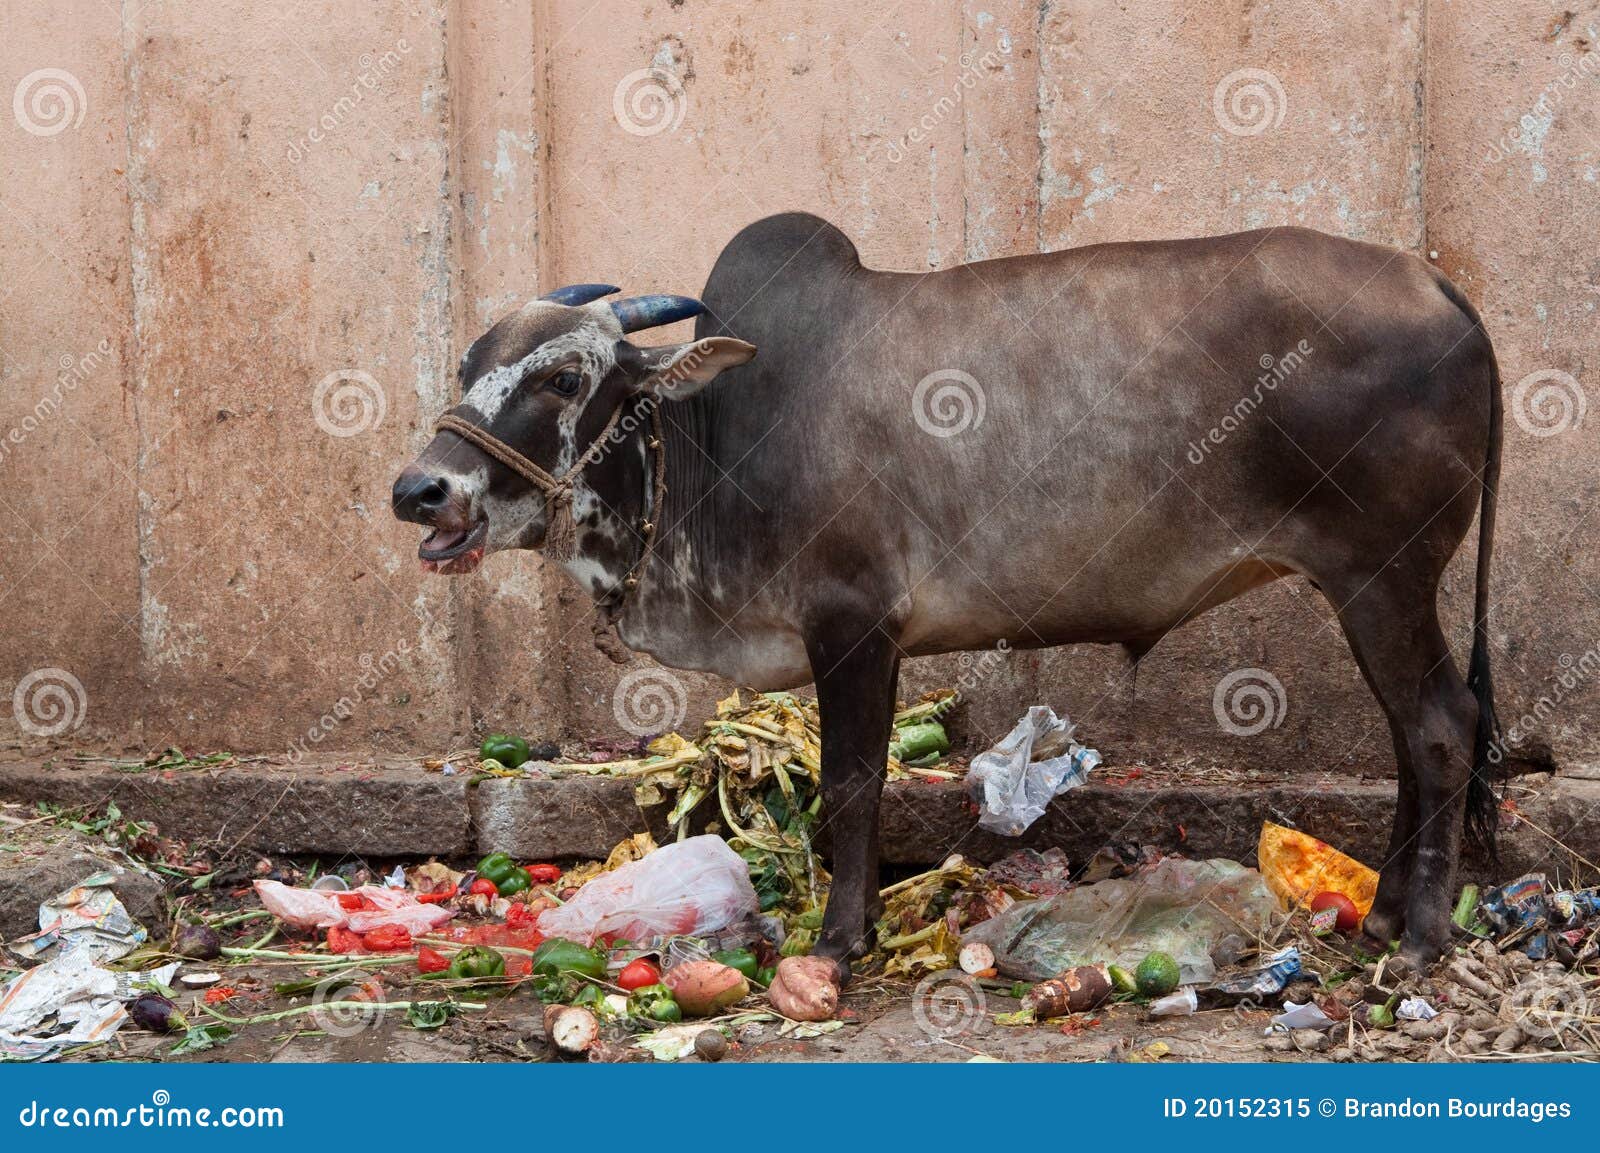 Sacred Cow in India